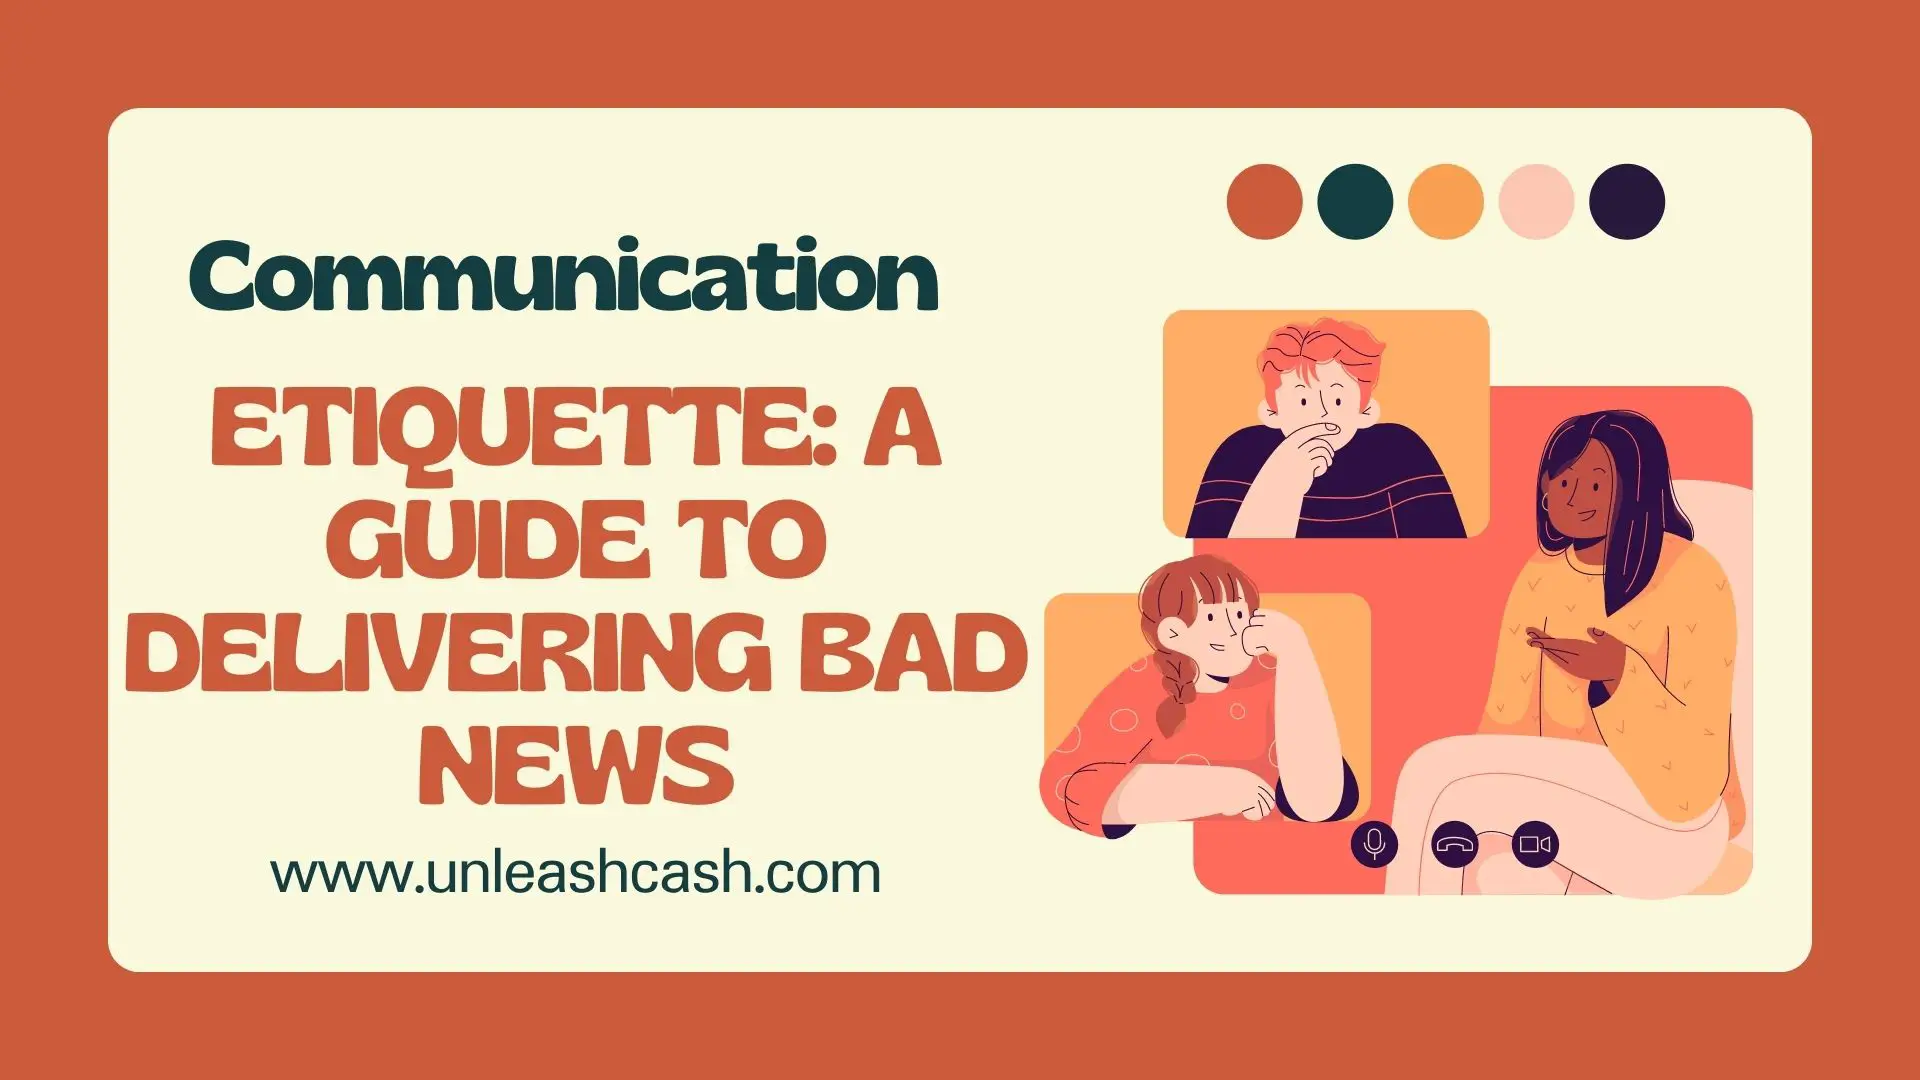 Communication Etiquette: A Guide To Delivering Bad News